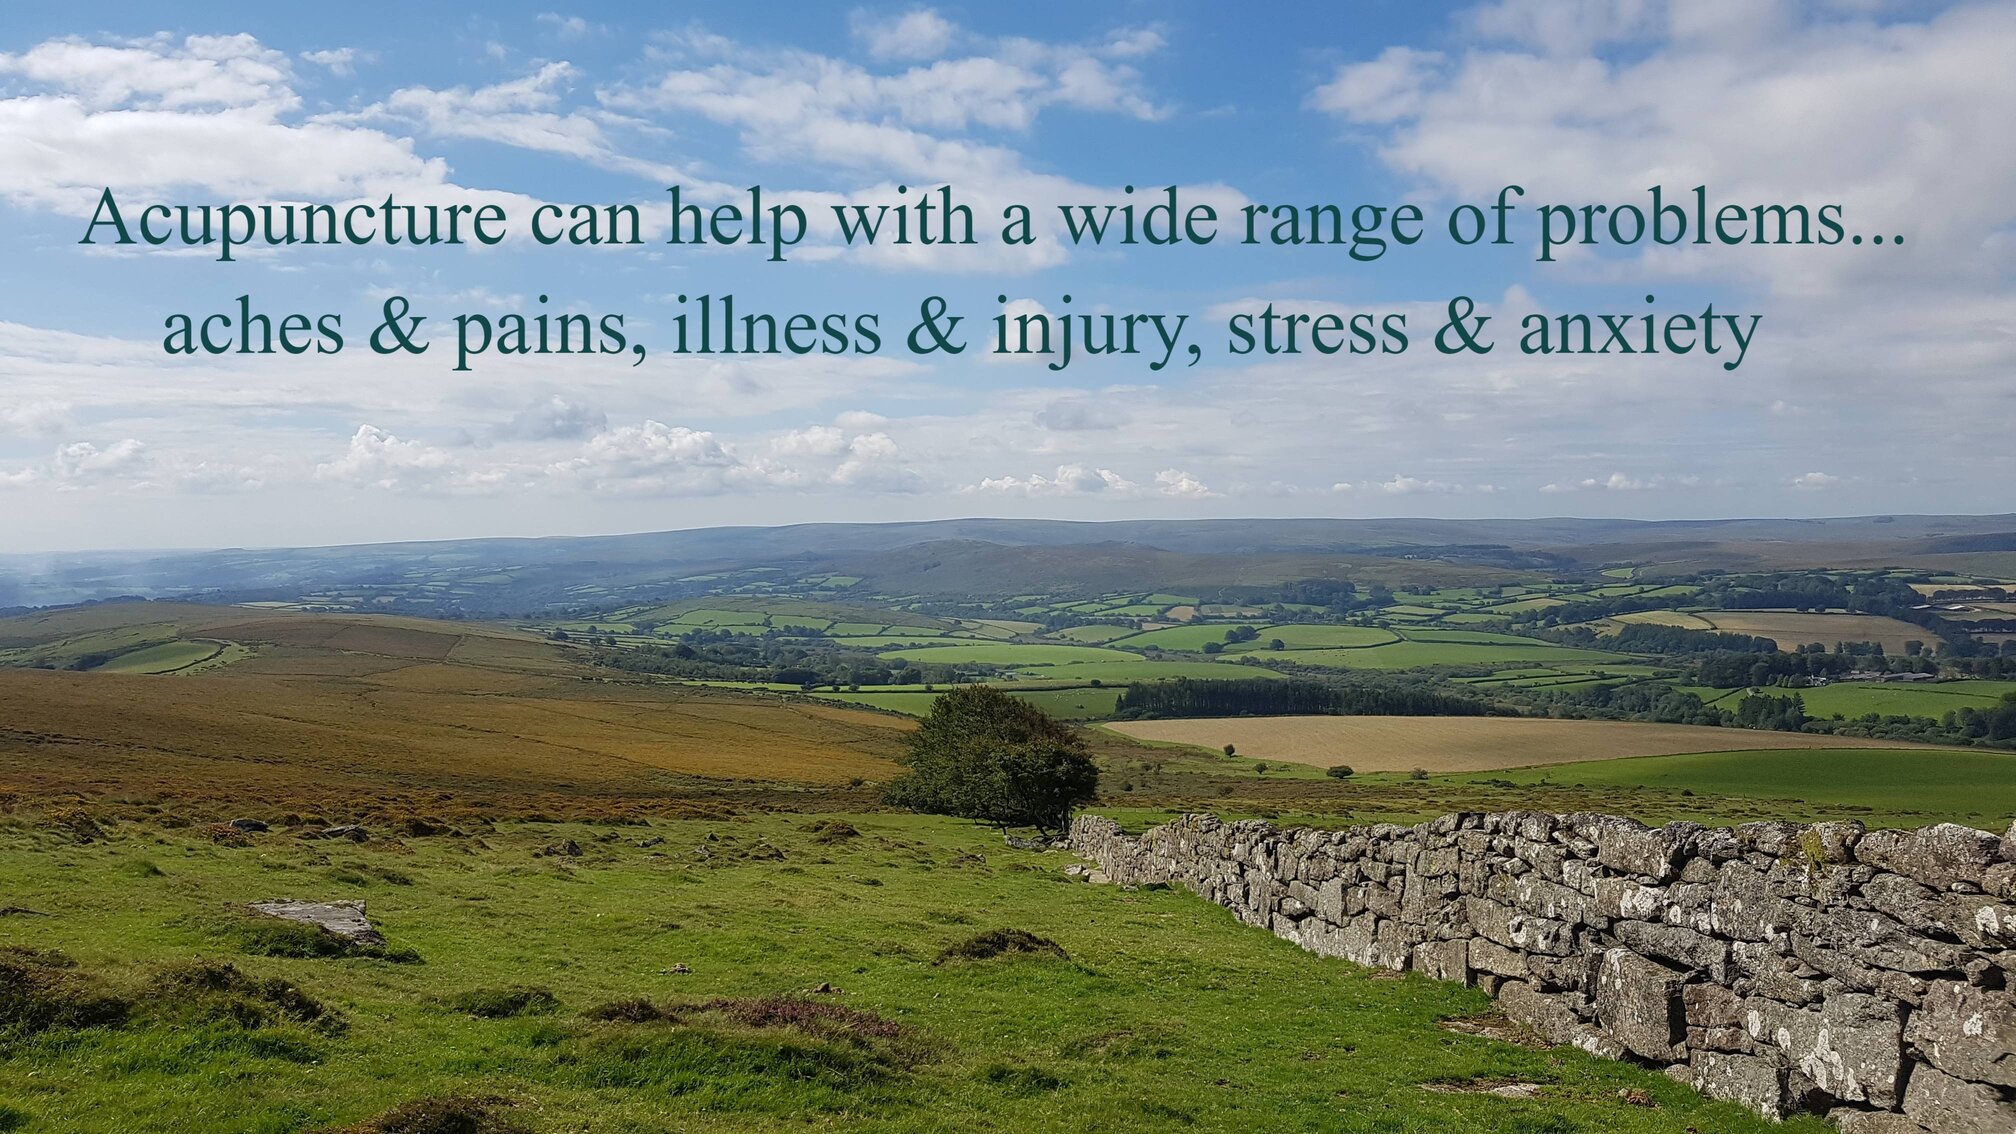 Acupuncture can help with a wide range of problems... aches & pains, illness & injury, stress & anxiety